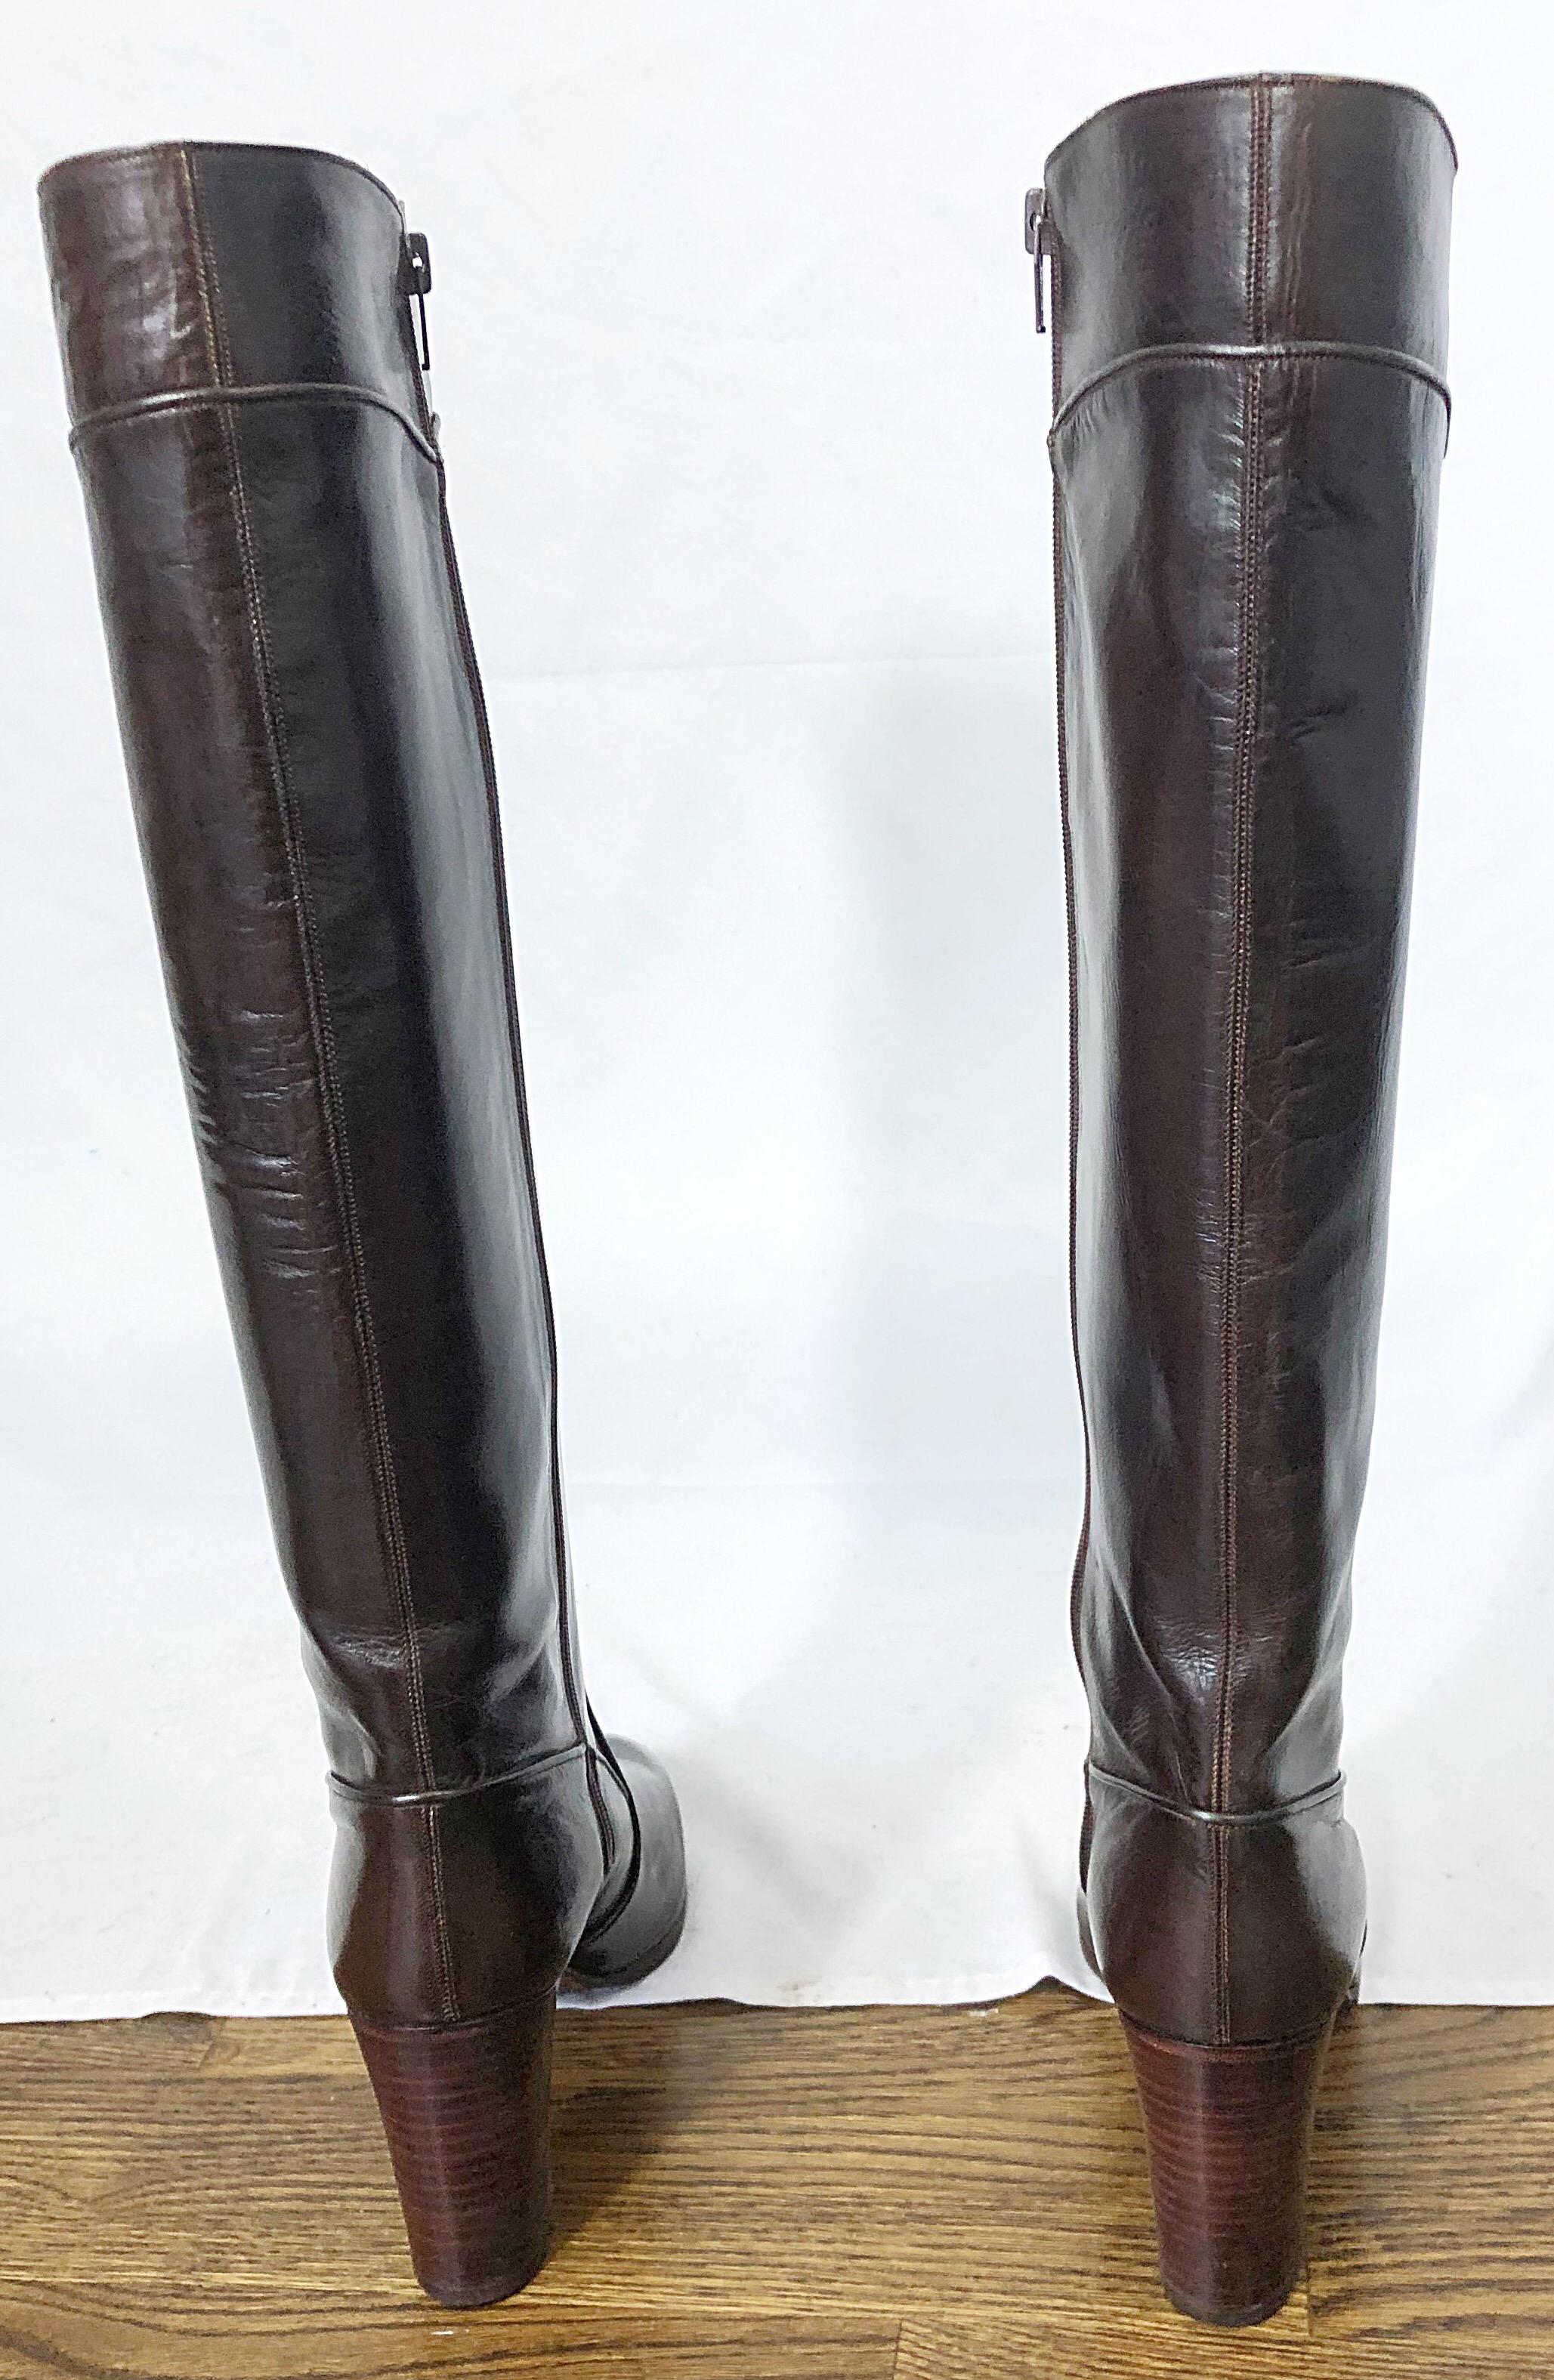 Women's Gucci 1970s Size 8.5 Chocolate Brown Leather Knee High Heel Vintage 70s Boots 